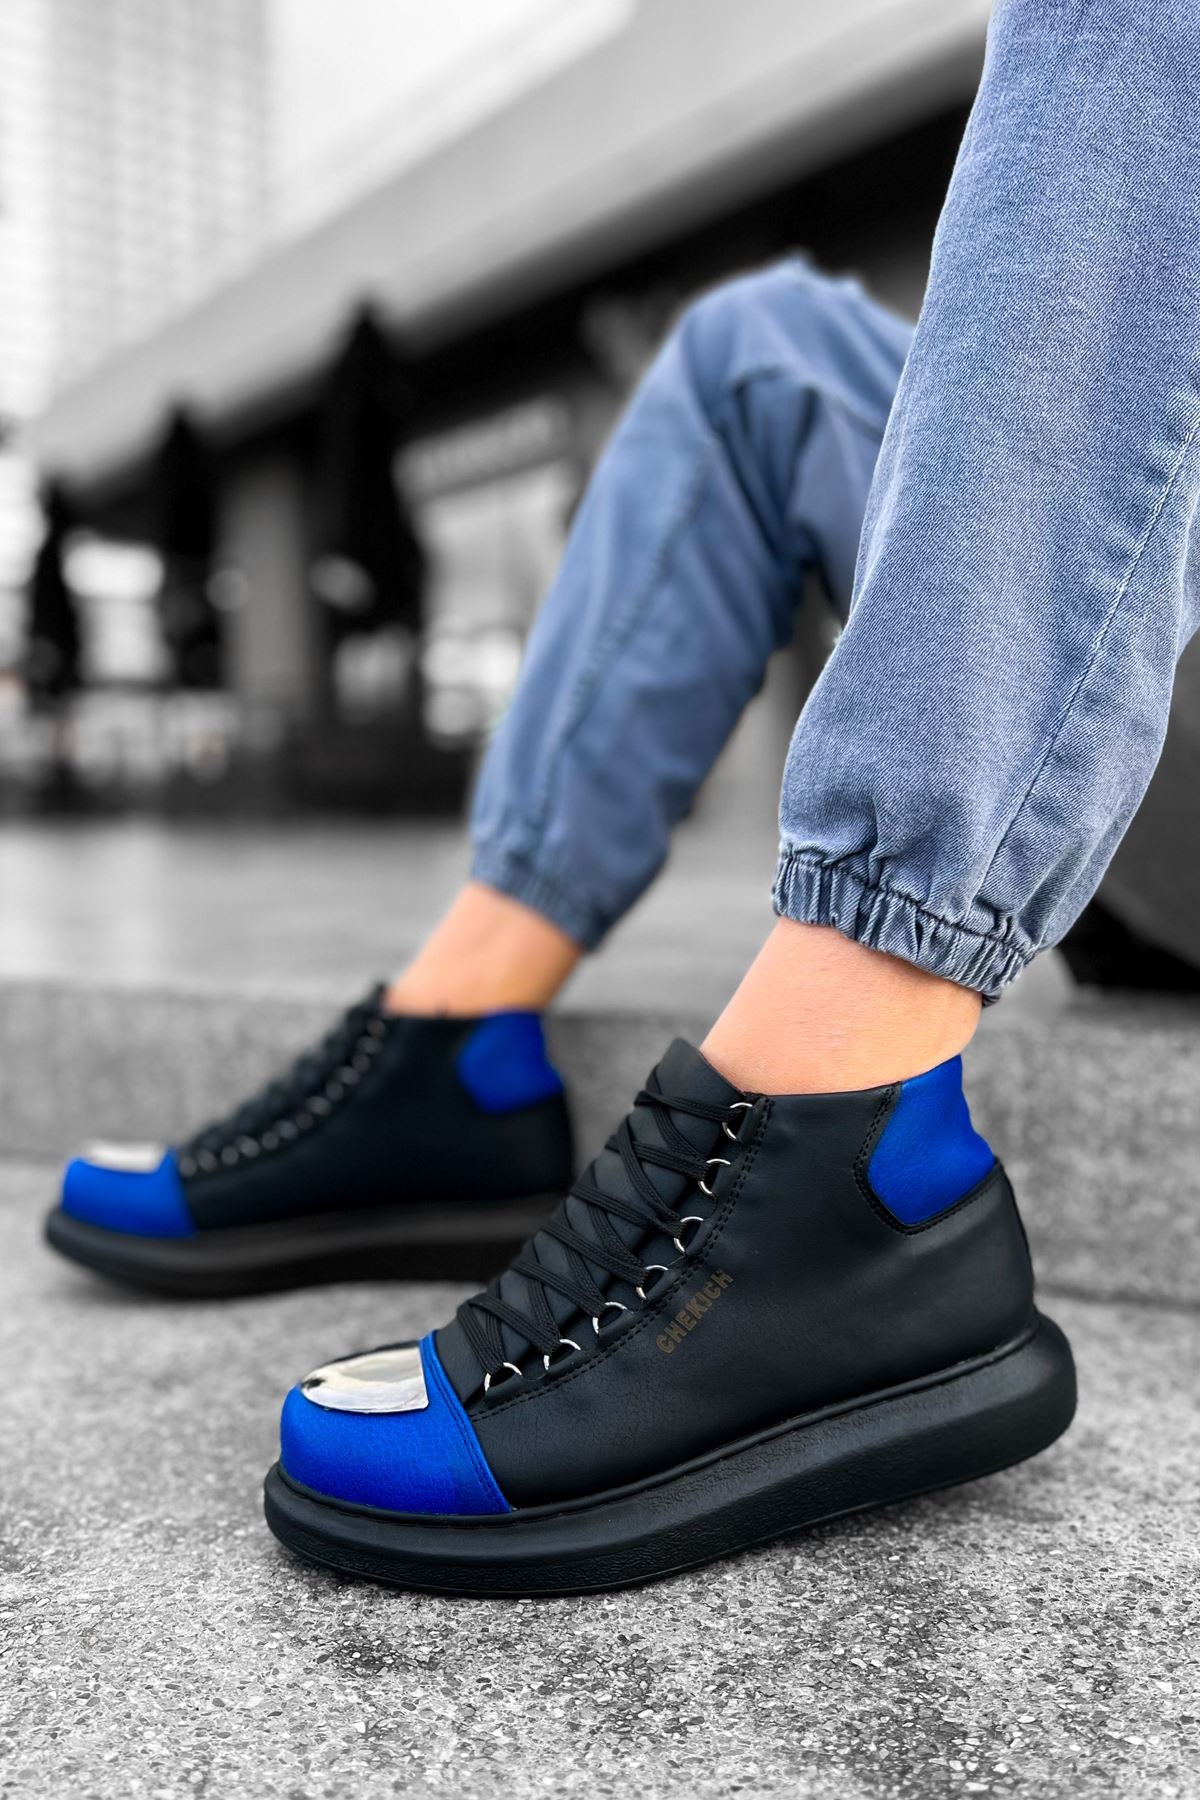 CH267 Men's shoes sneakers Boots BLACK/SAX BLUE - STREETMODE ™